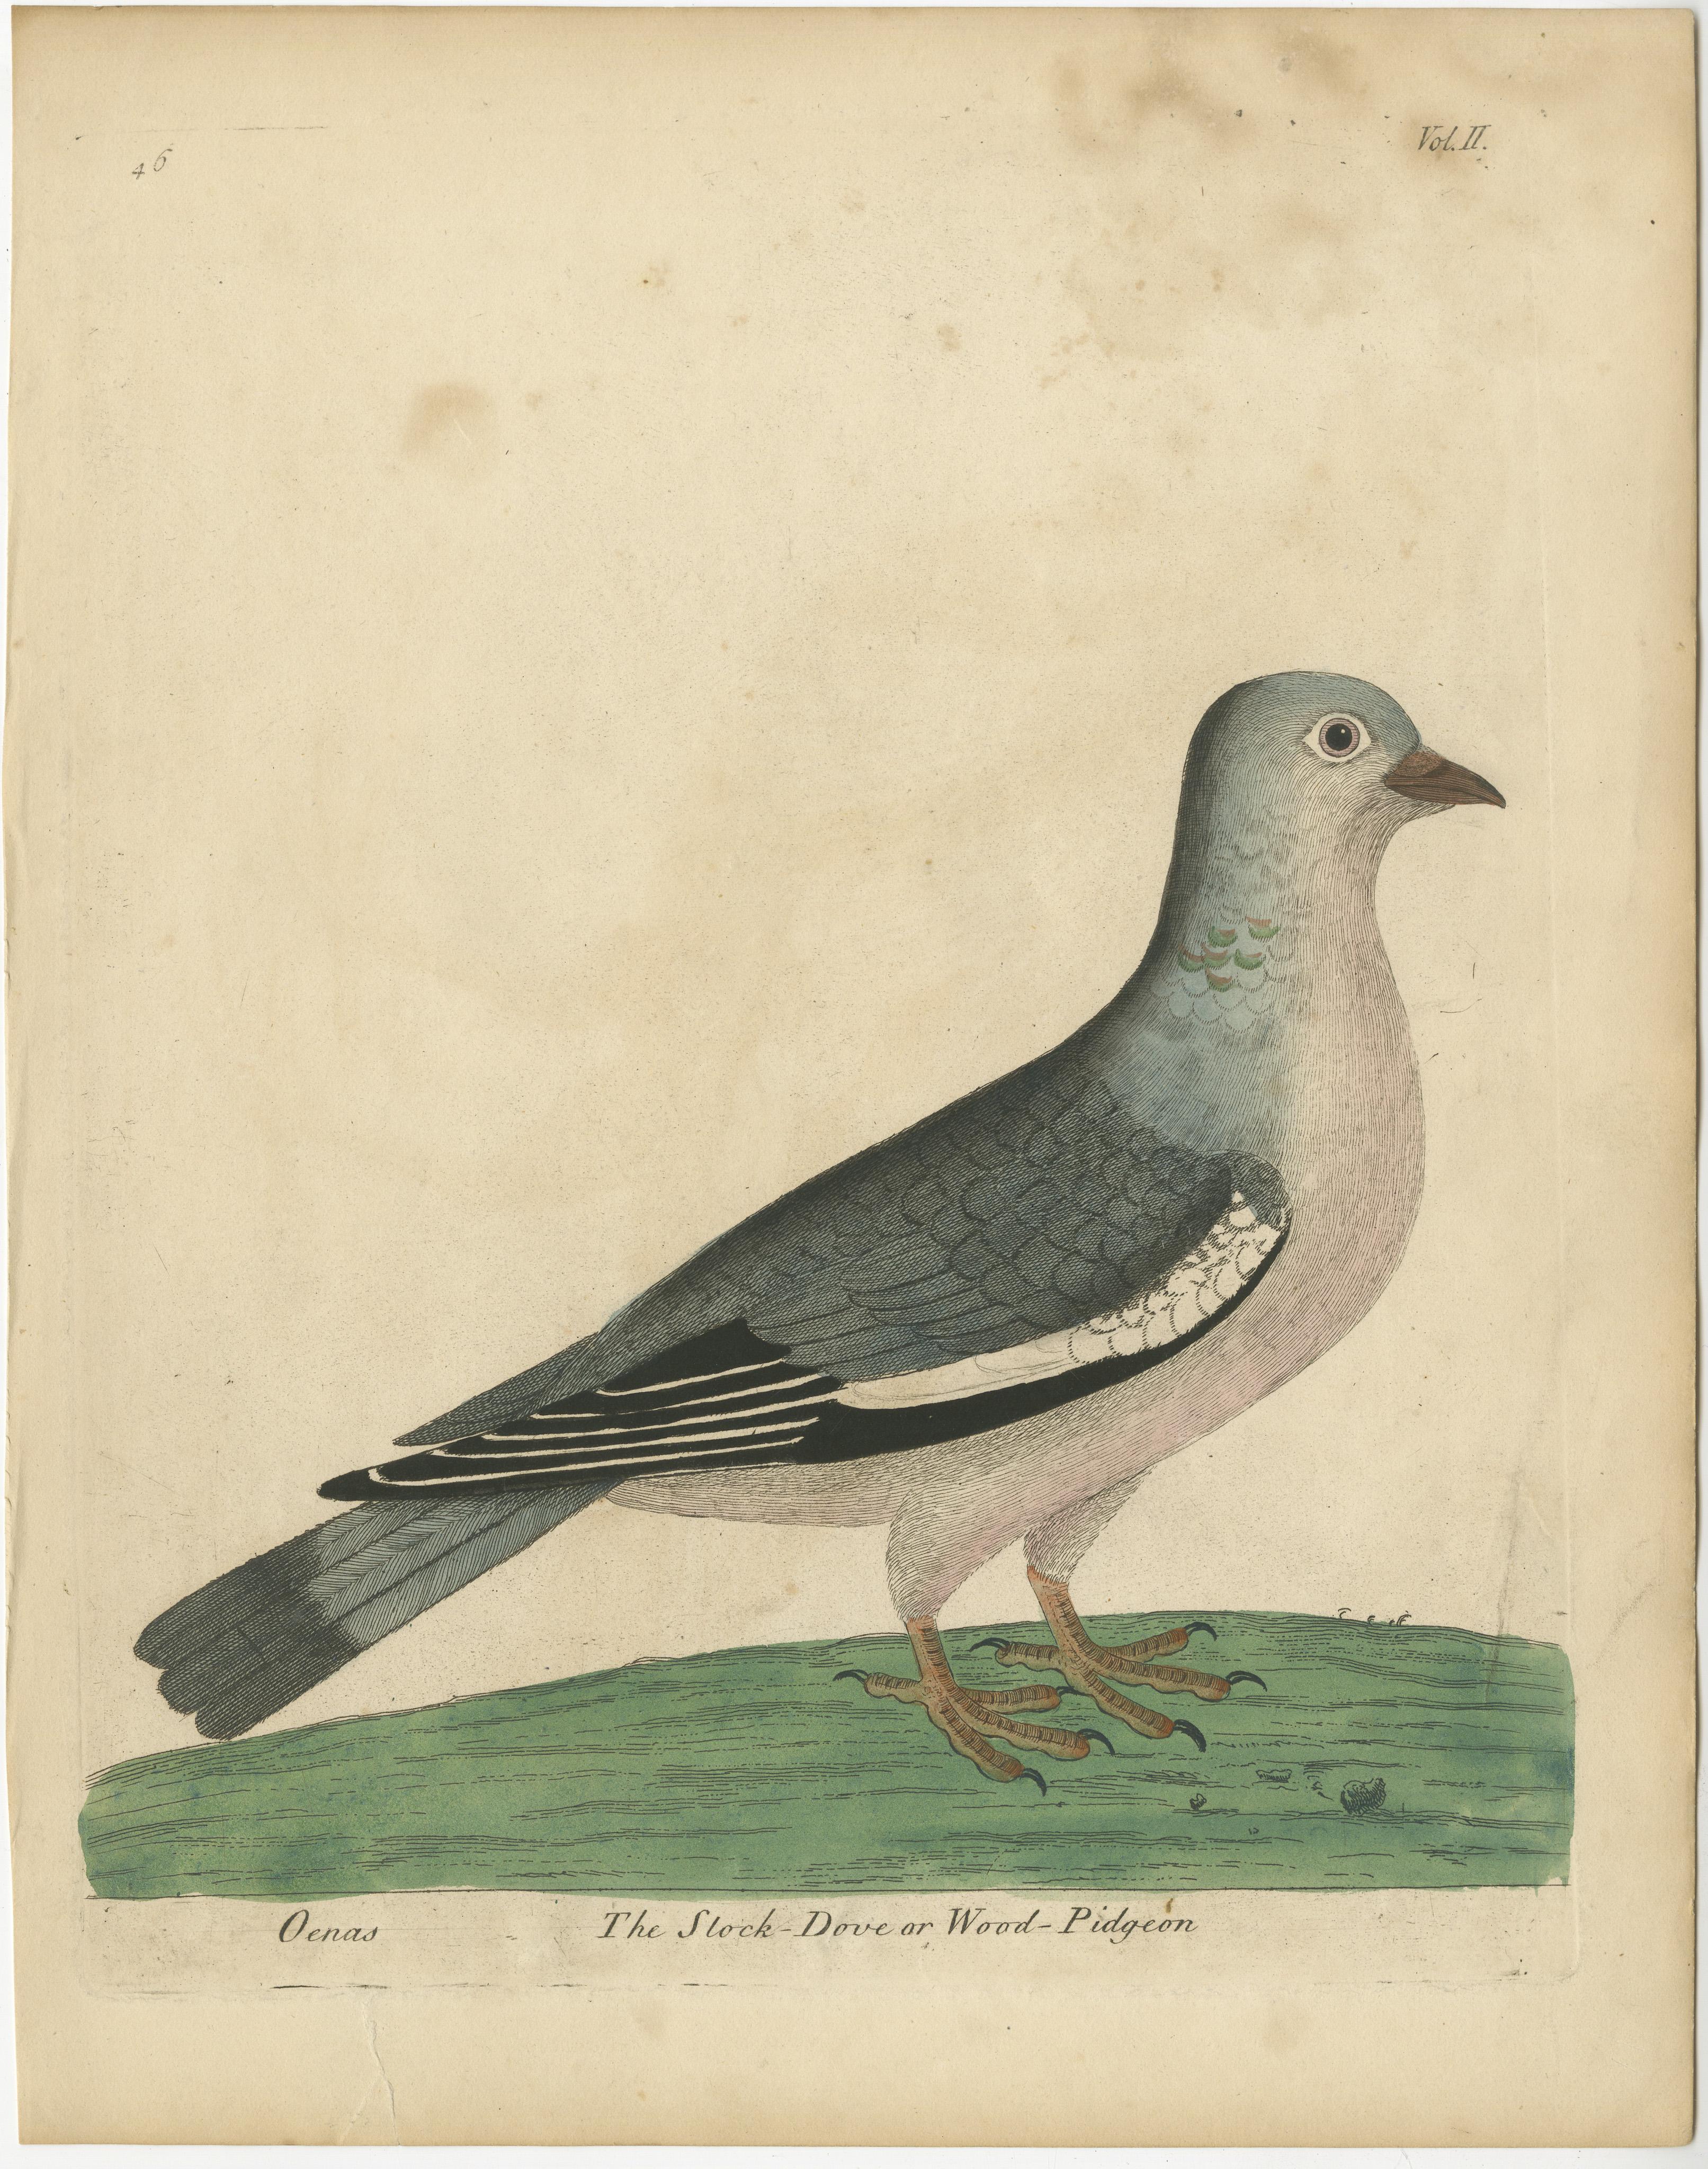 Antique bird print titled 'The Stock-Dove or Wood-Pidgeon'. Original antique print of a wood pigeon. This print originates from 'A Supplement to the Natural History of Birds illustrated with an Hundred and One Copper Plates (..)' by Eleazar Albin.